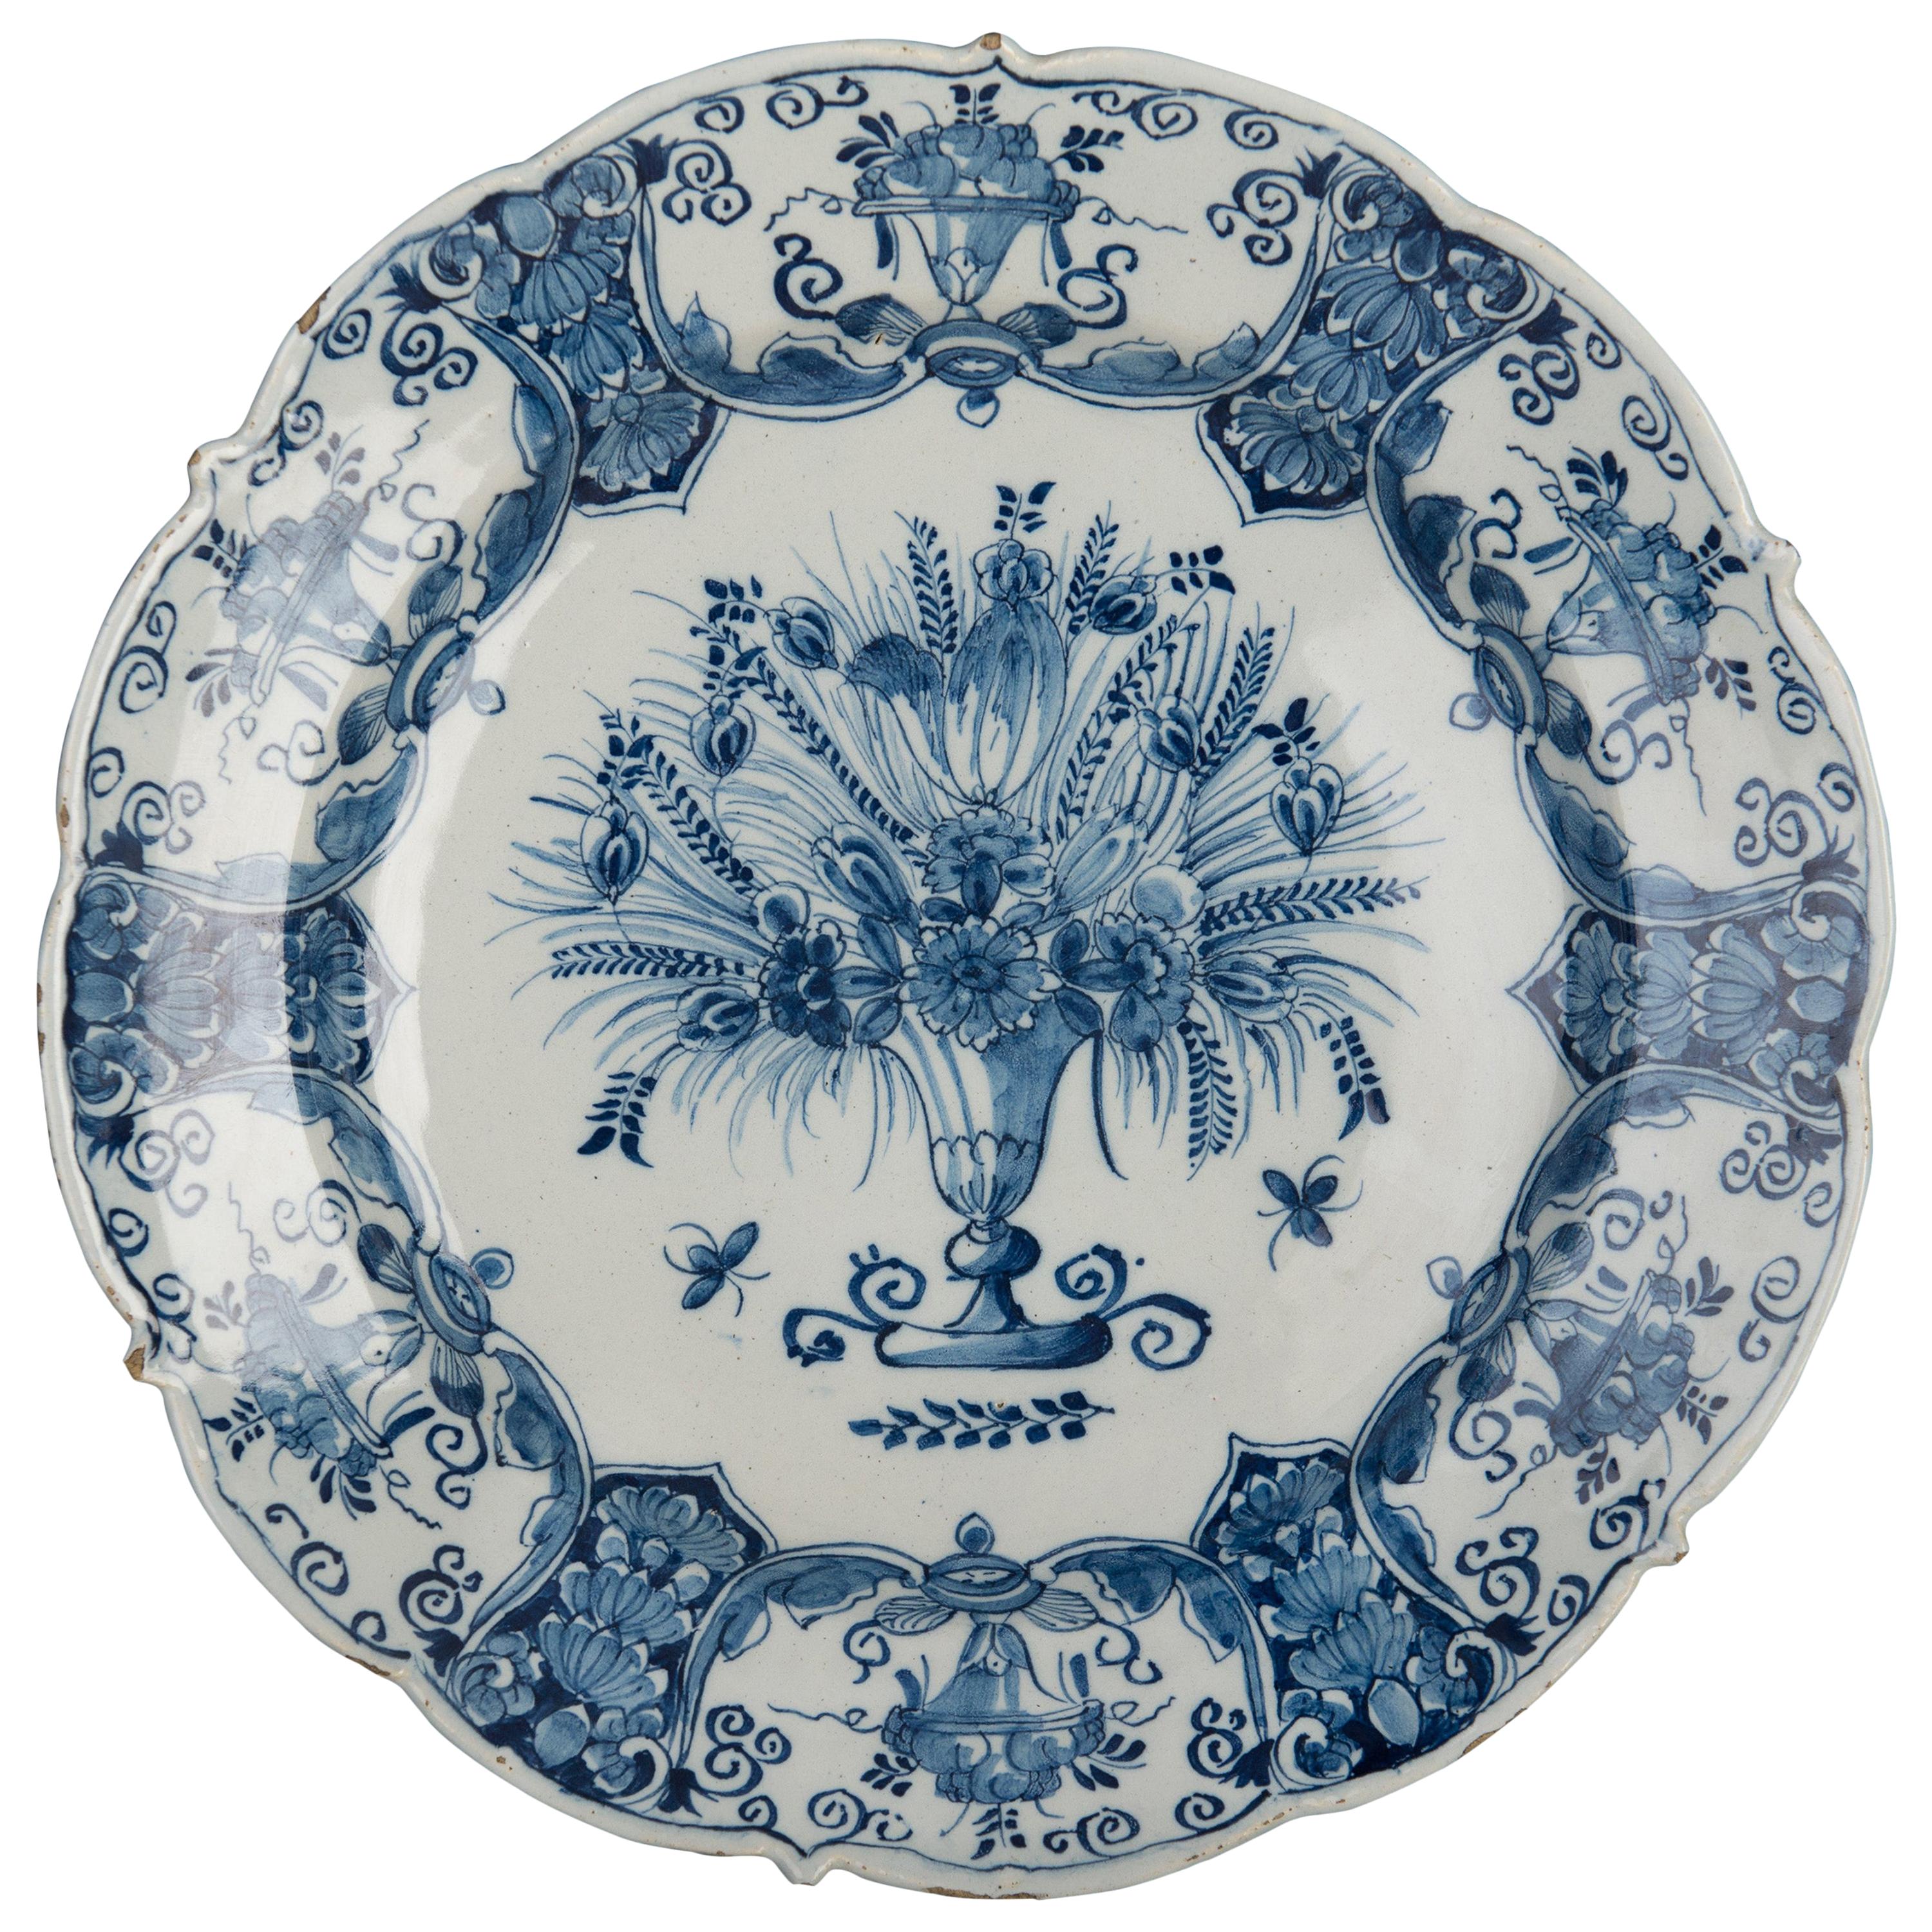 Delft, Large Blue and White Dish with Flower Vase, 1750, the Three Bells Pottery For Sale